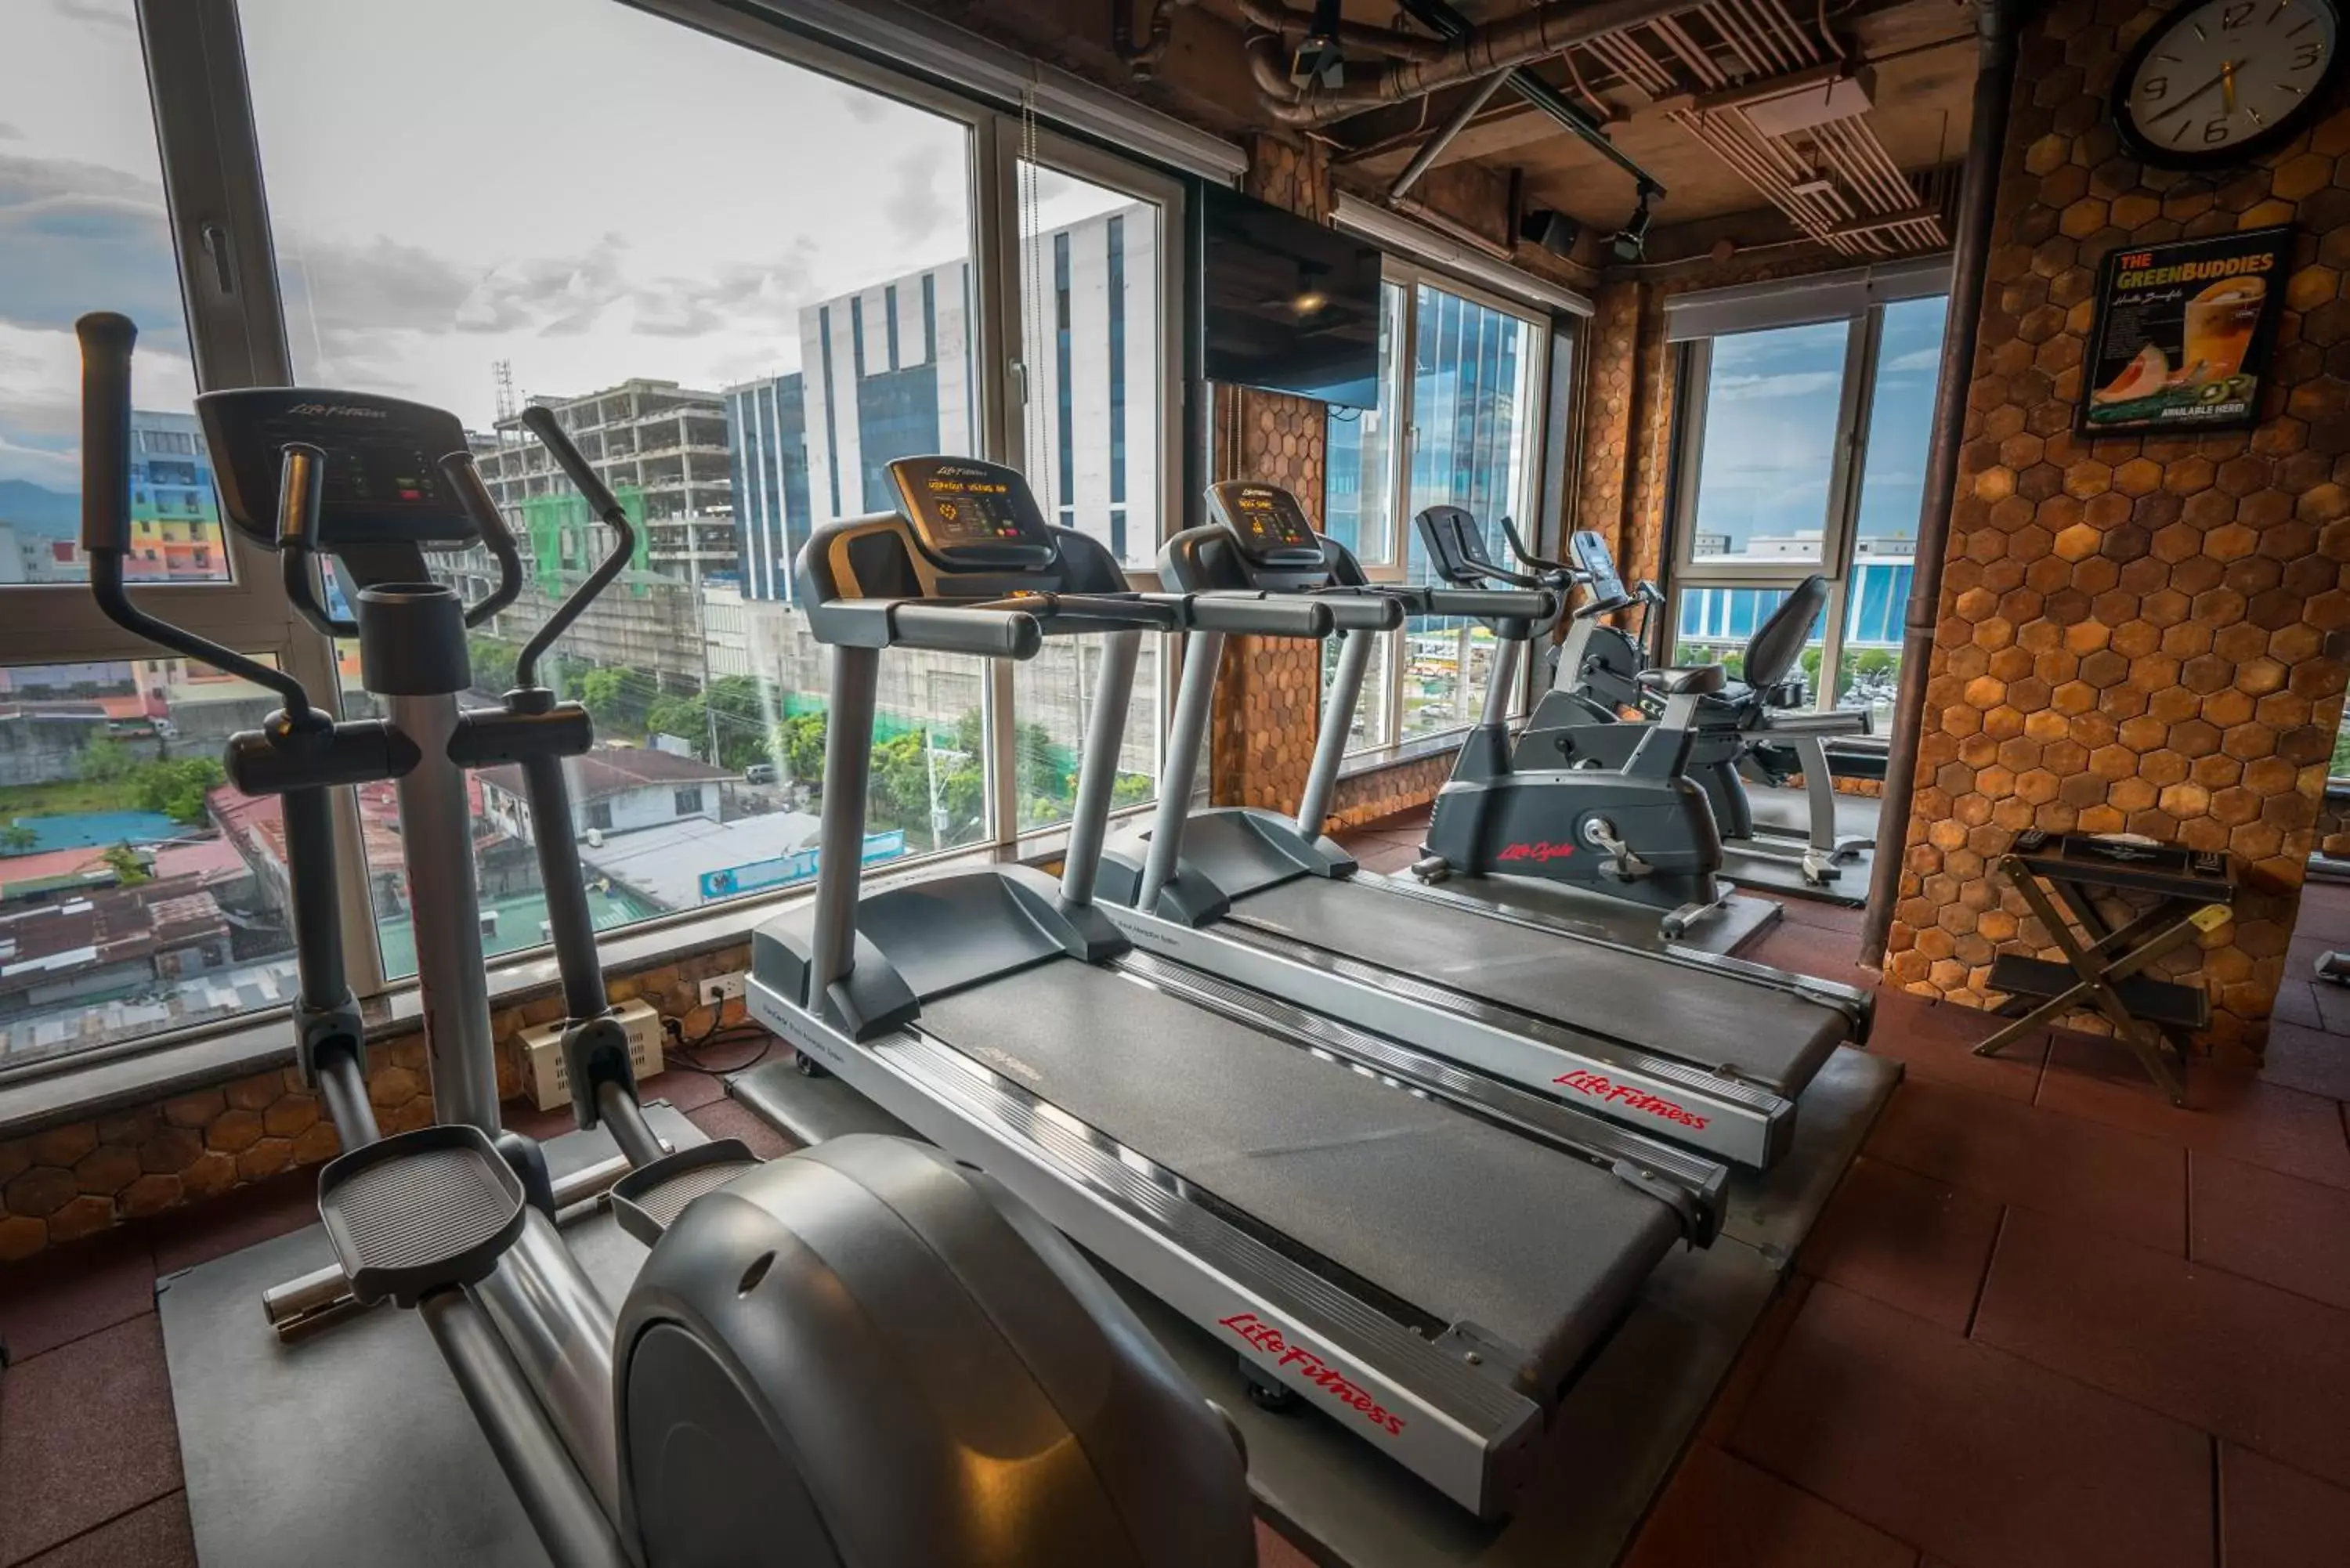 Fitness centre/facilities, Fitness Center/Facilities in ABC Hotel